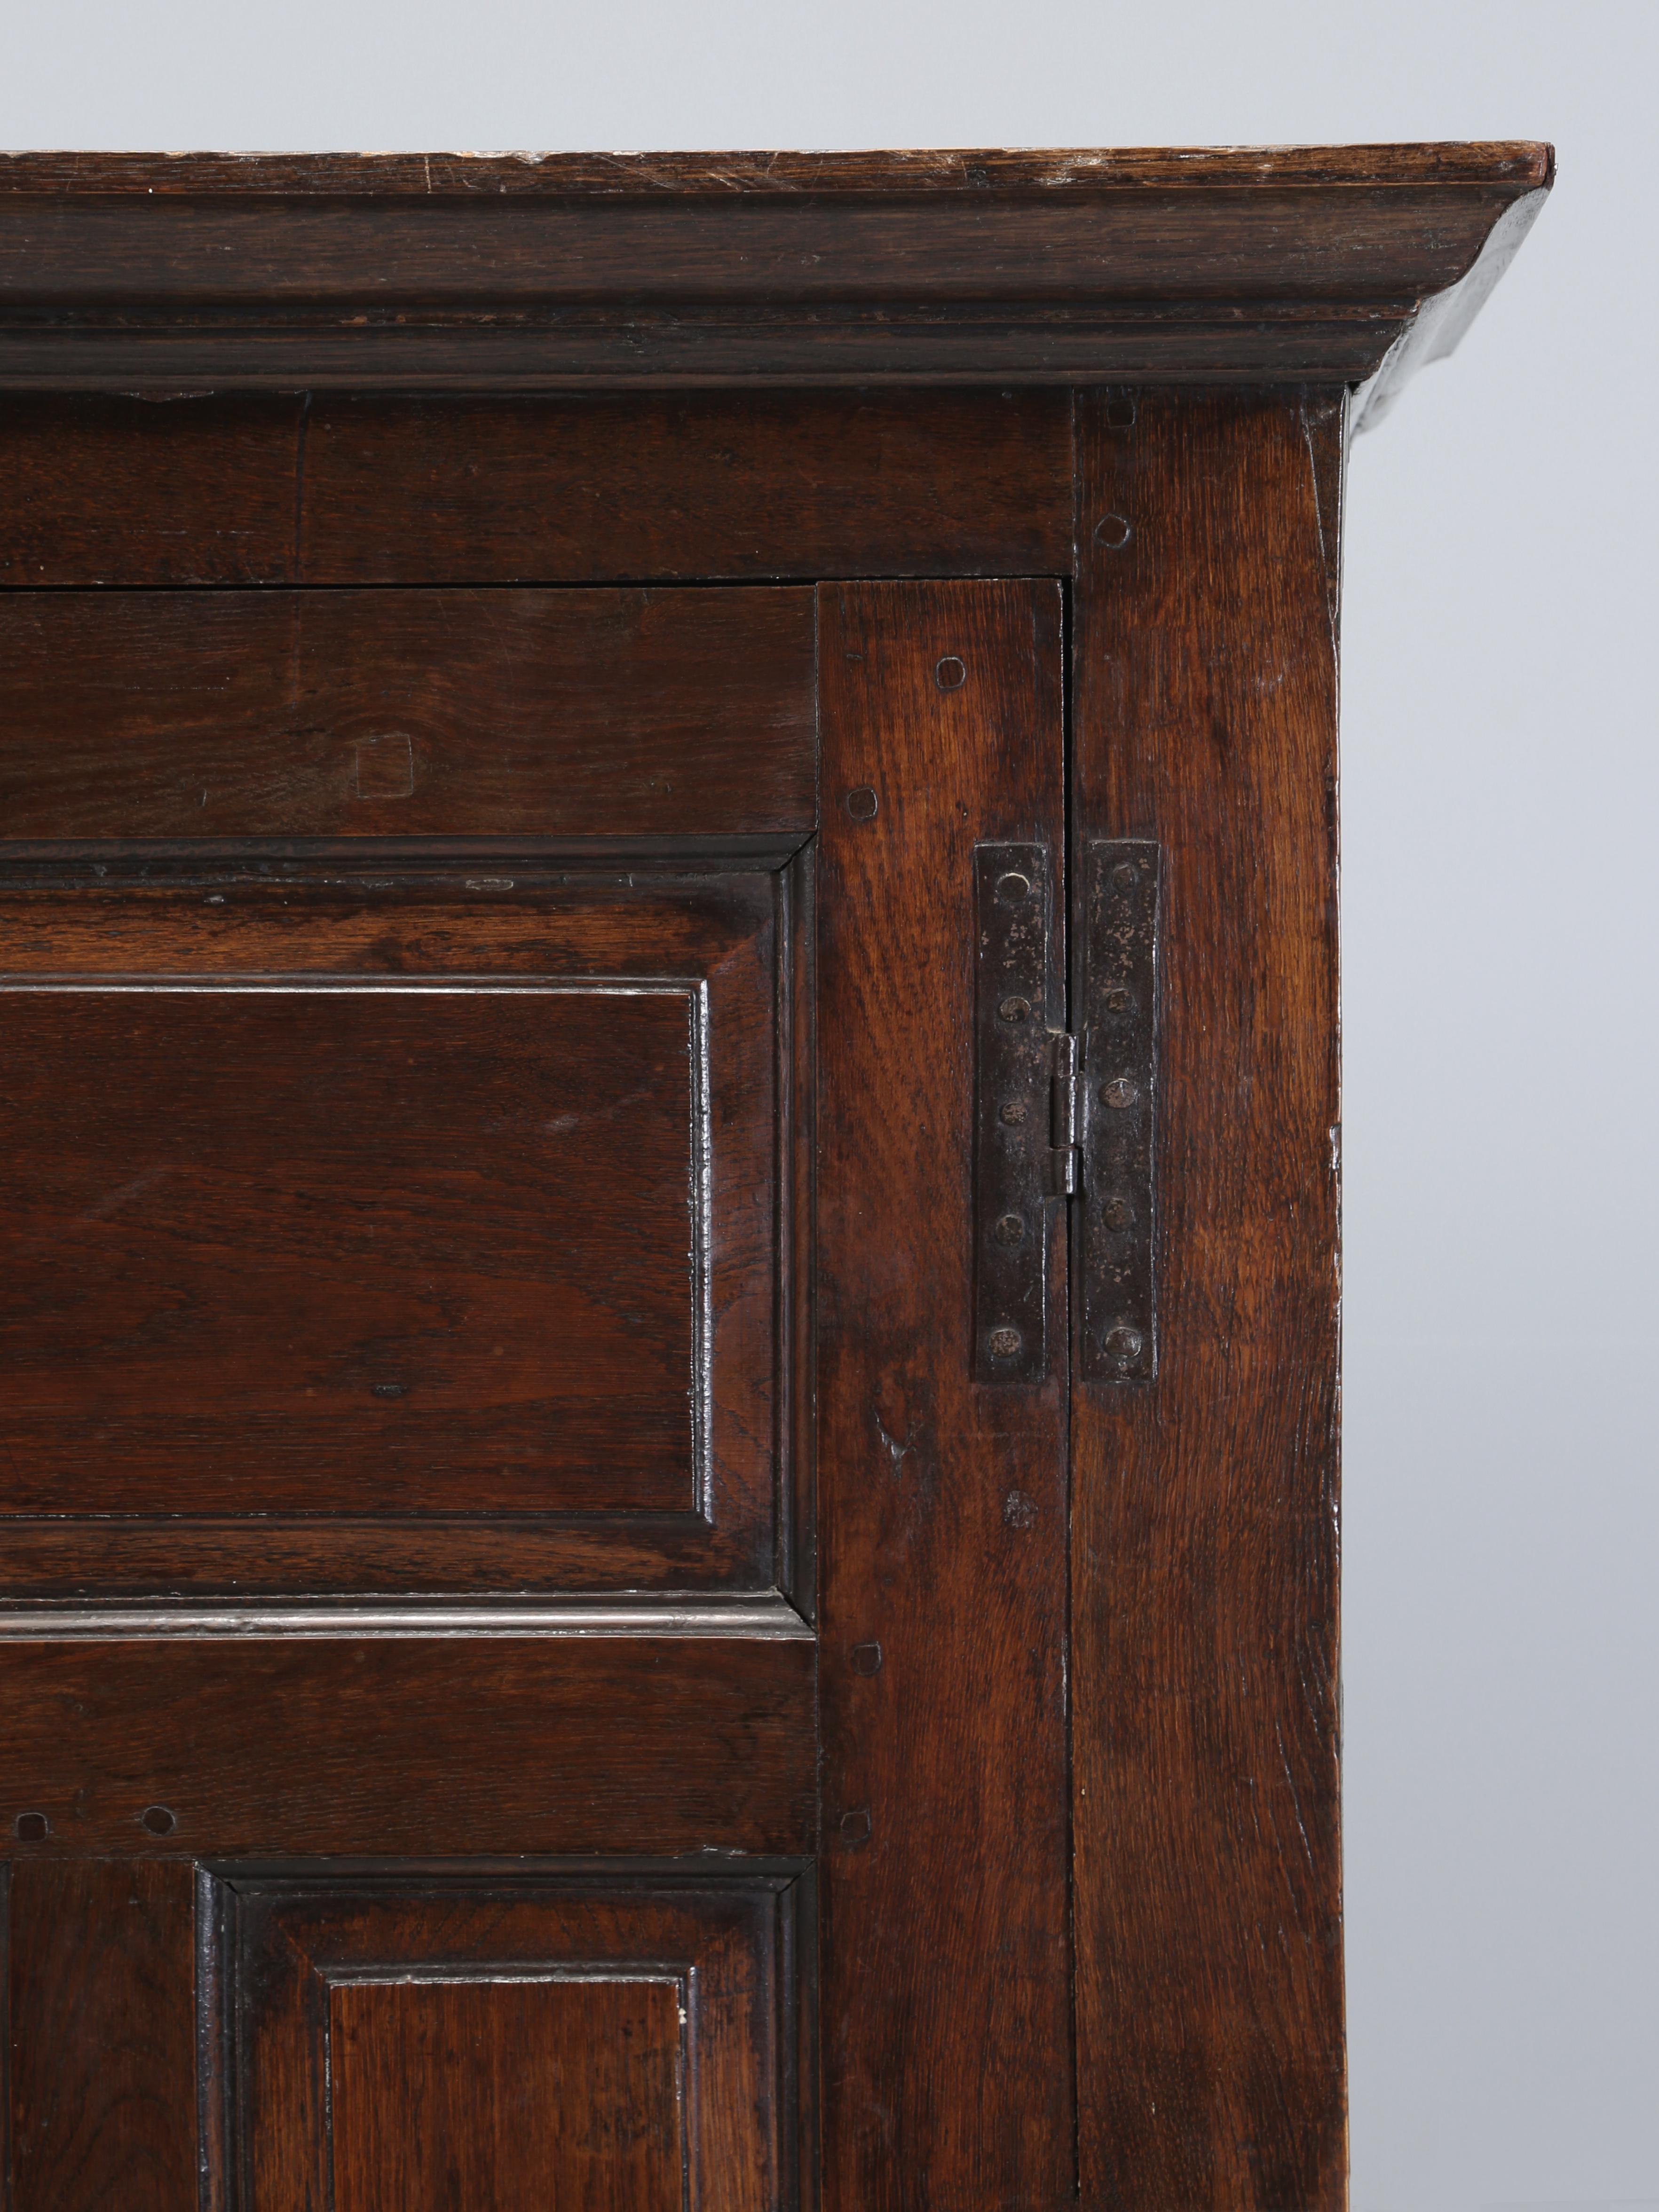 Early 18th Century Antique English Oak Baker's Cupboard or Back Hall Coat Closet c1700-40 Original  For Sale